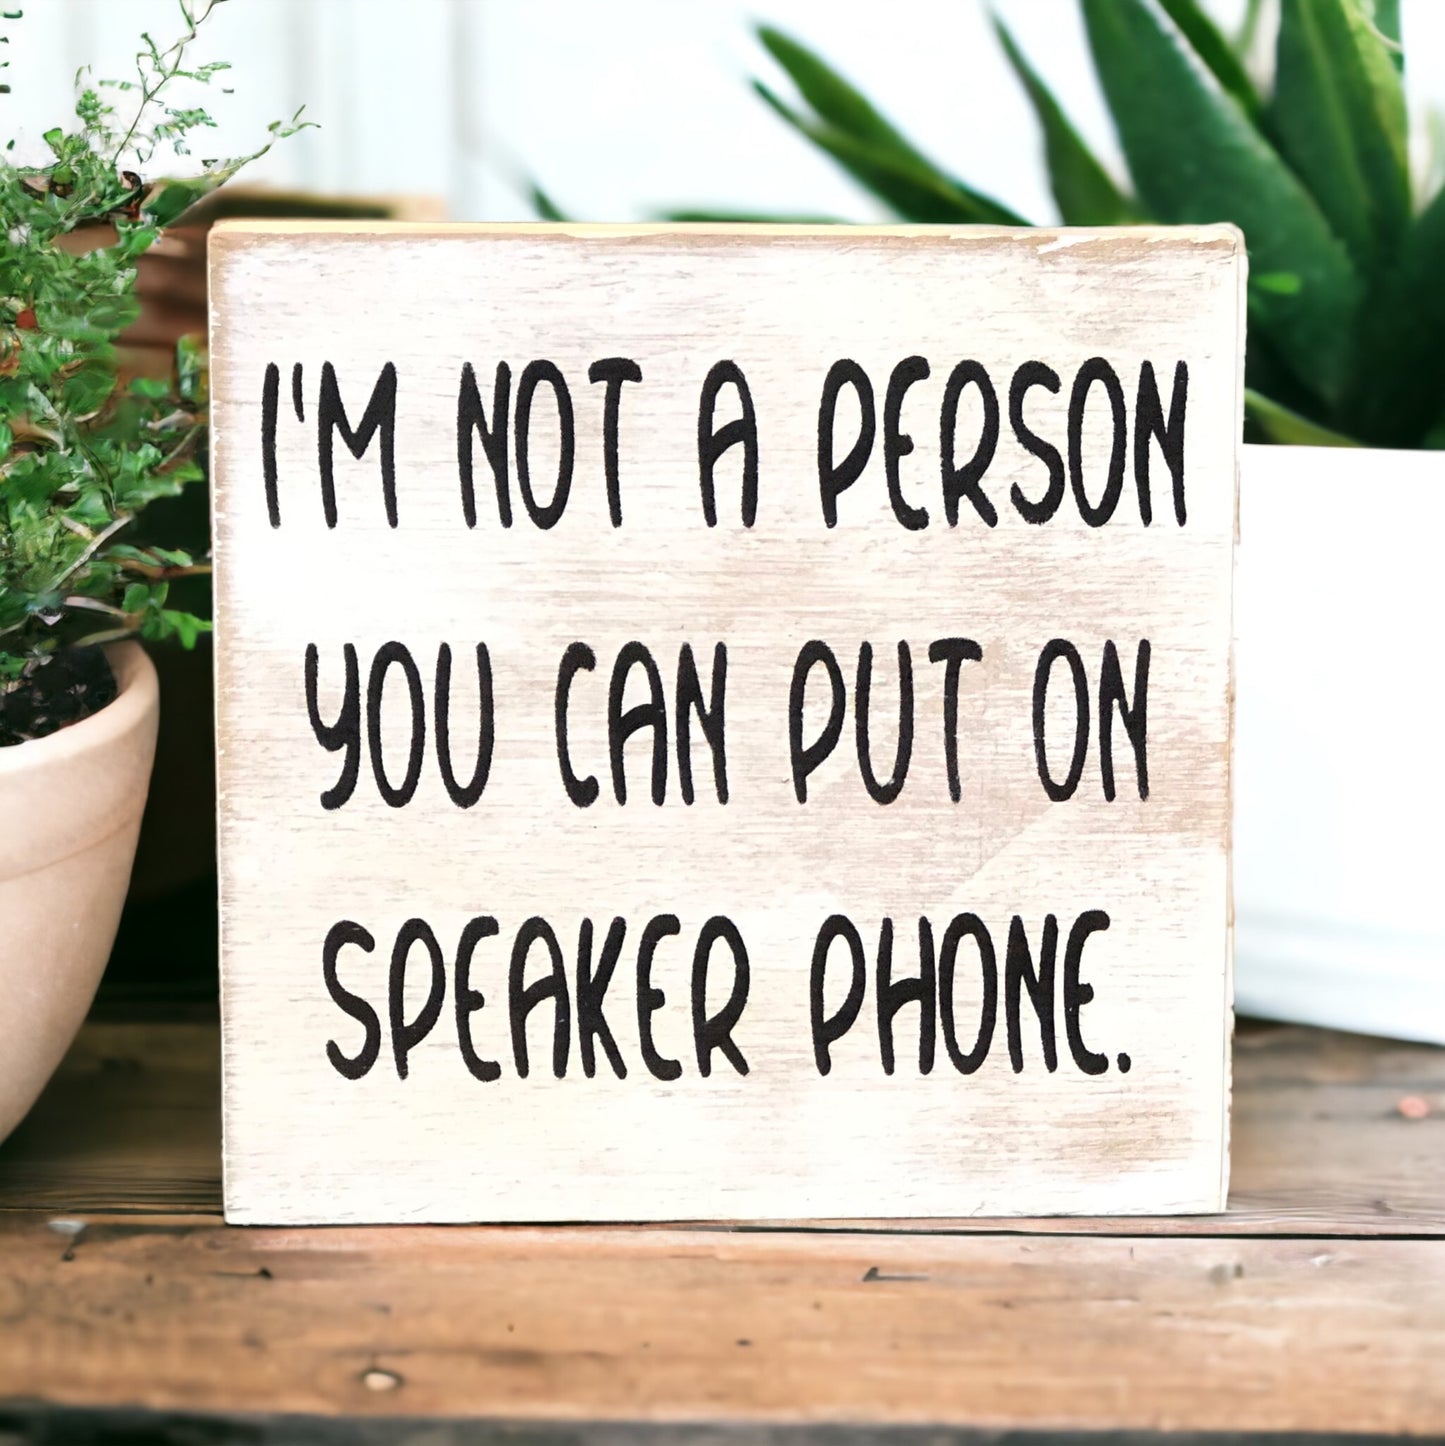 "I'm not a person you can put on speakerphone" wood sign